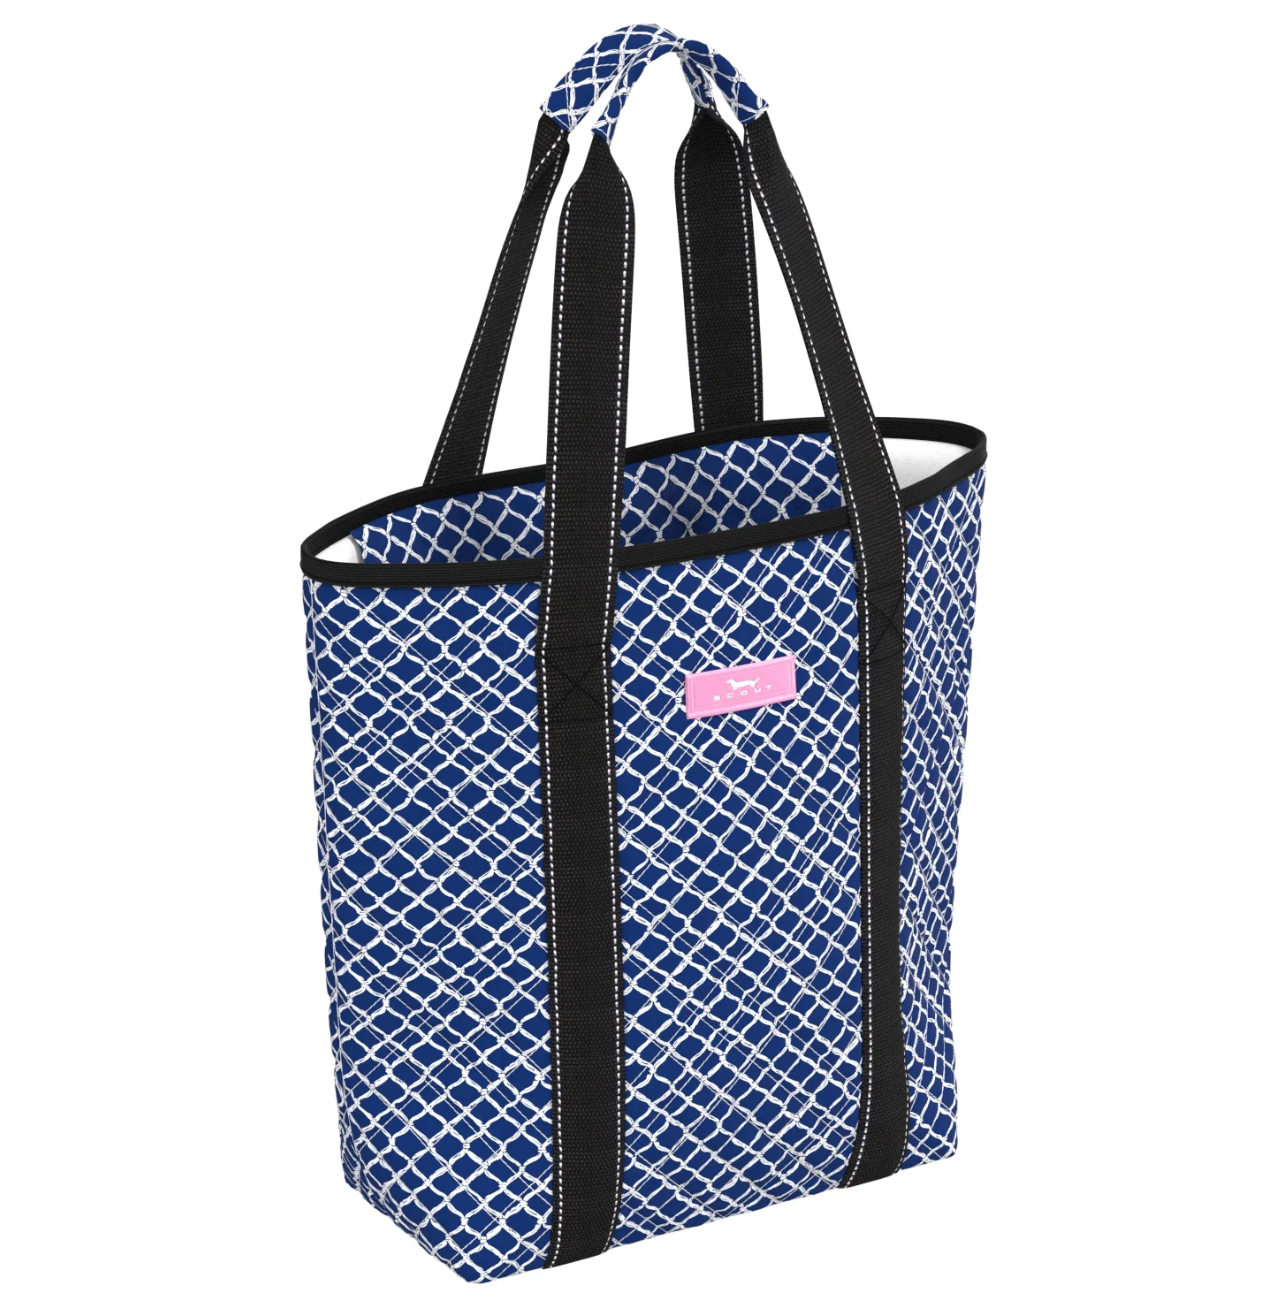 Scout Reese Bag Totes in Knotty but Nice at Wrapsody